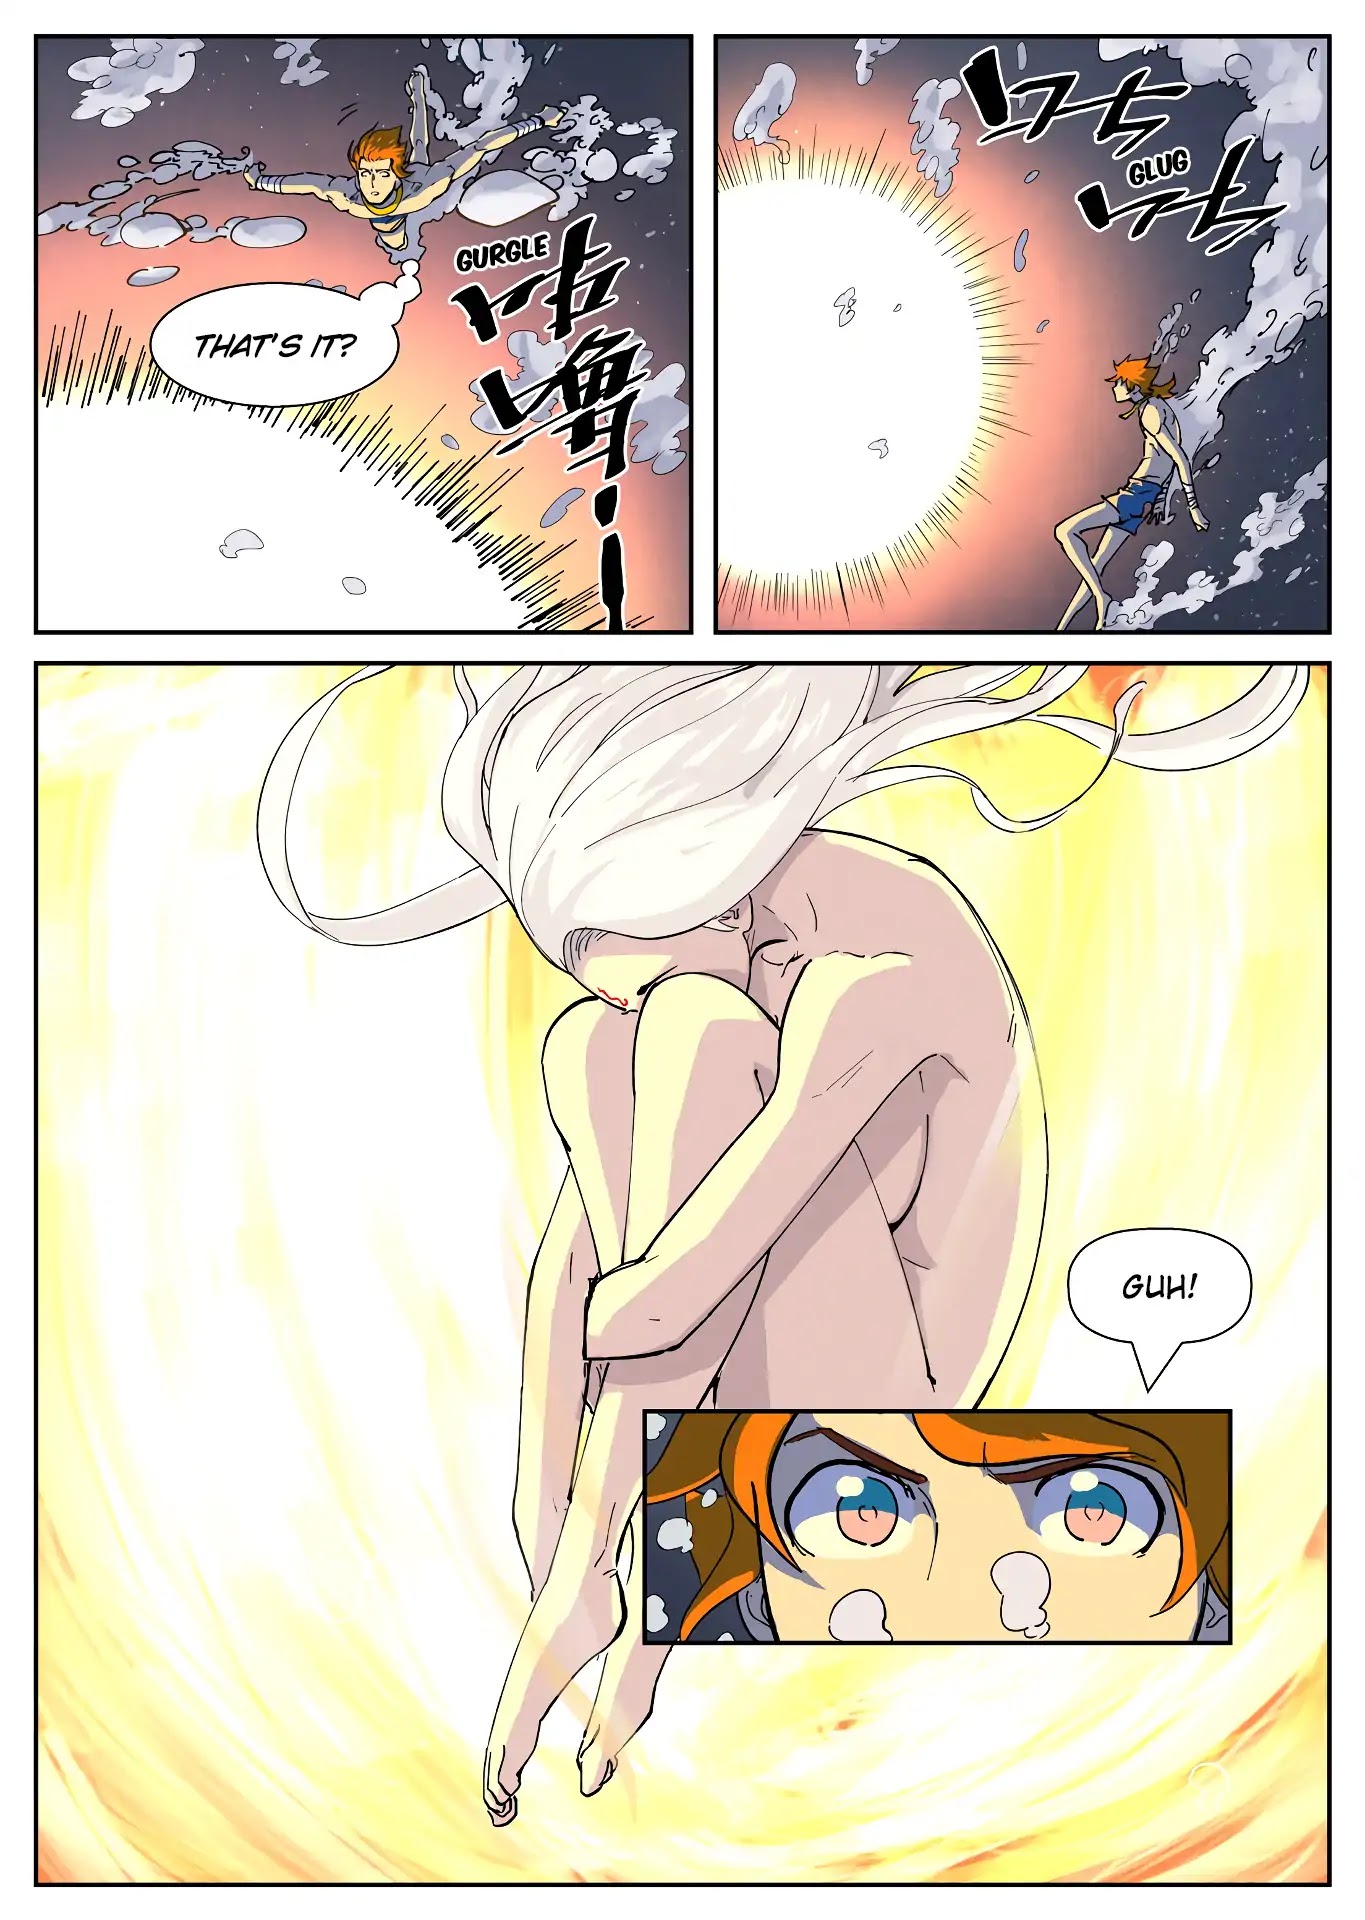 Tales of Demons and Gods Chapter 225: The Object at the Bottom of the Pool